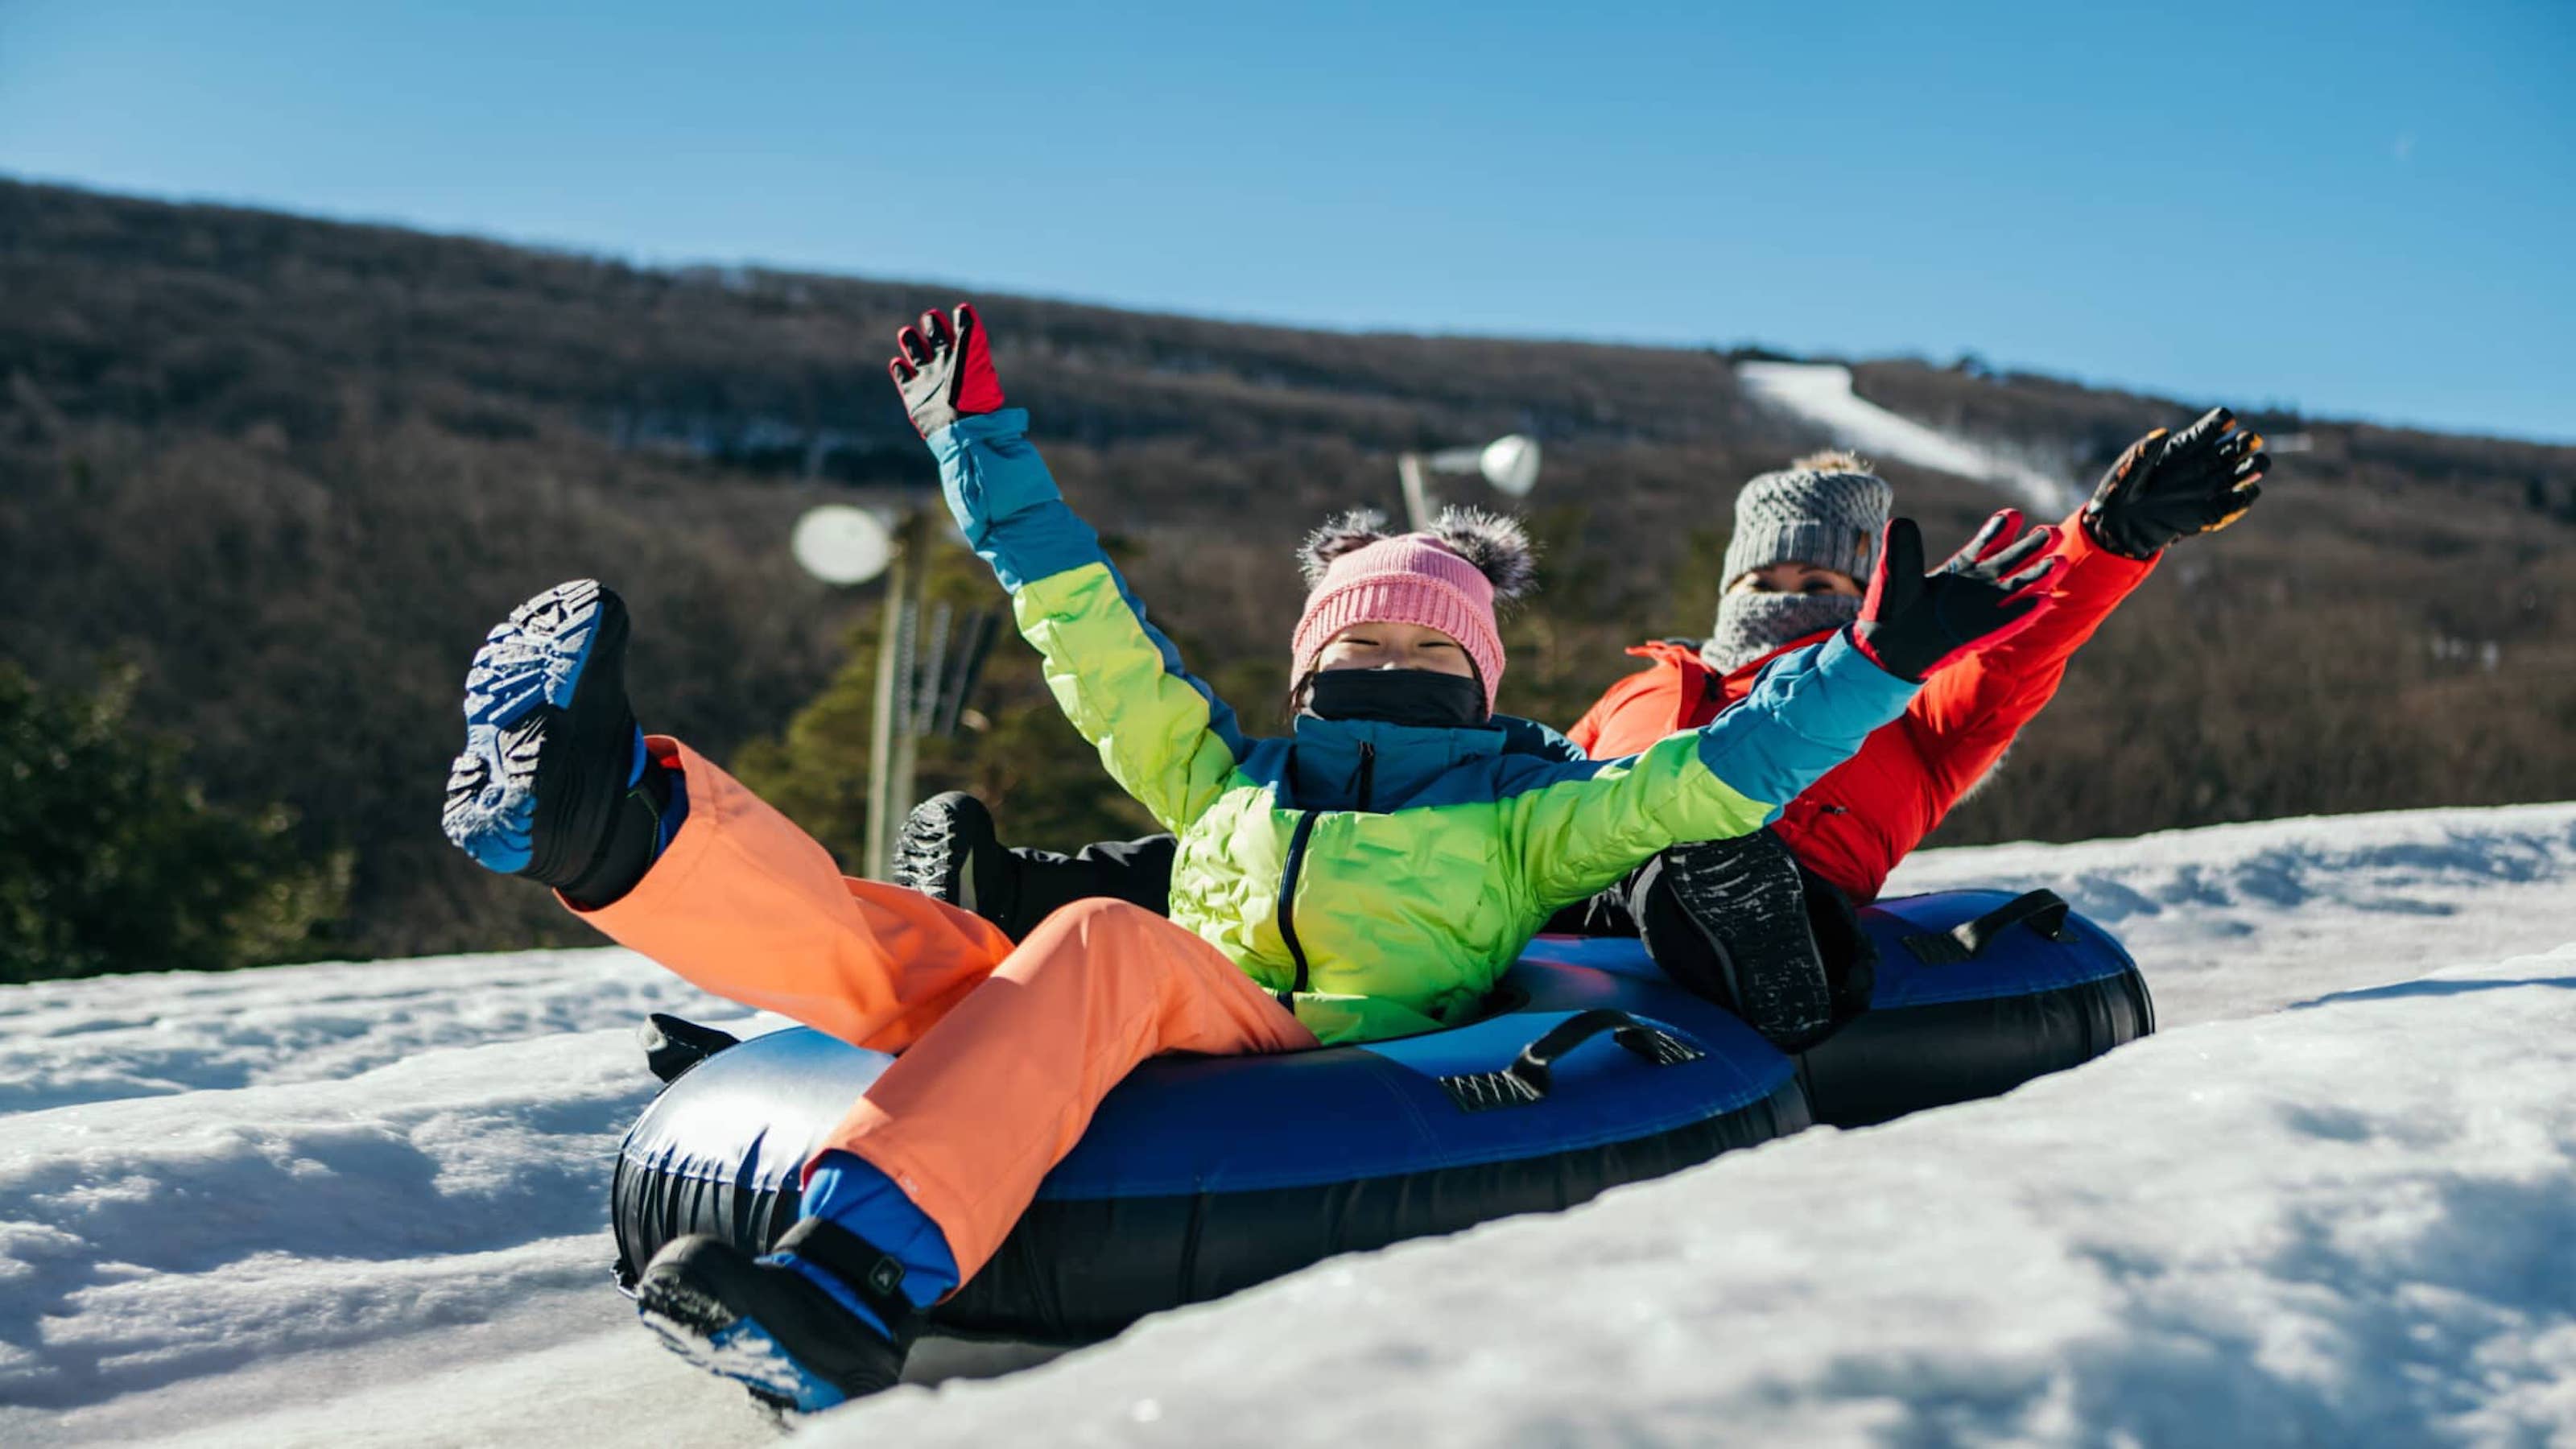 Top Seven Reasons to Rent Your Ski Clothes - Luxury Travel Mom